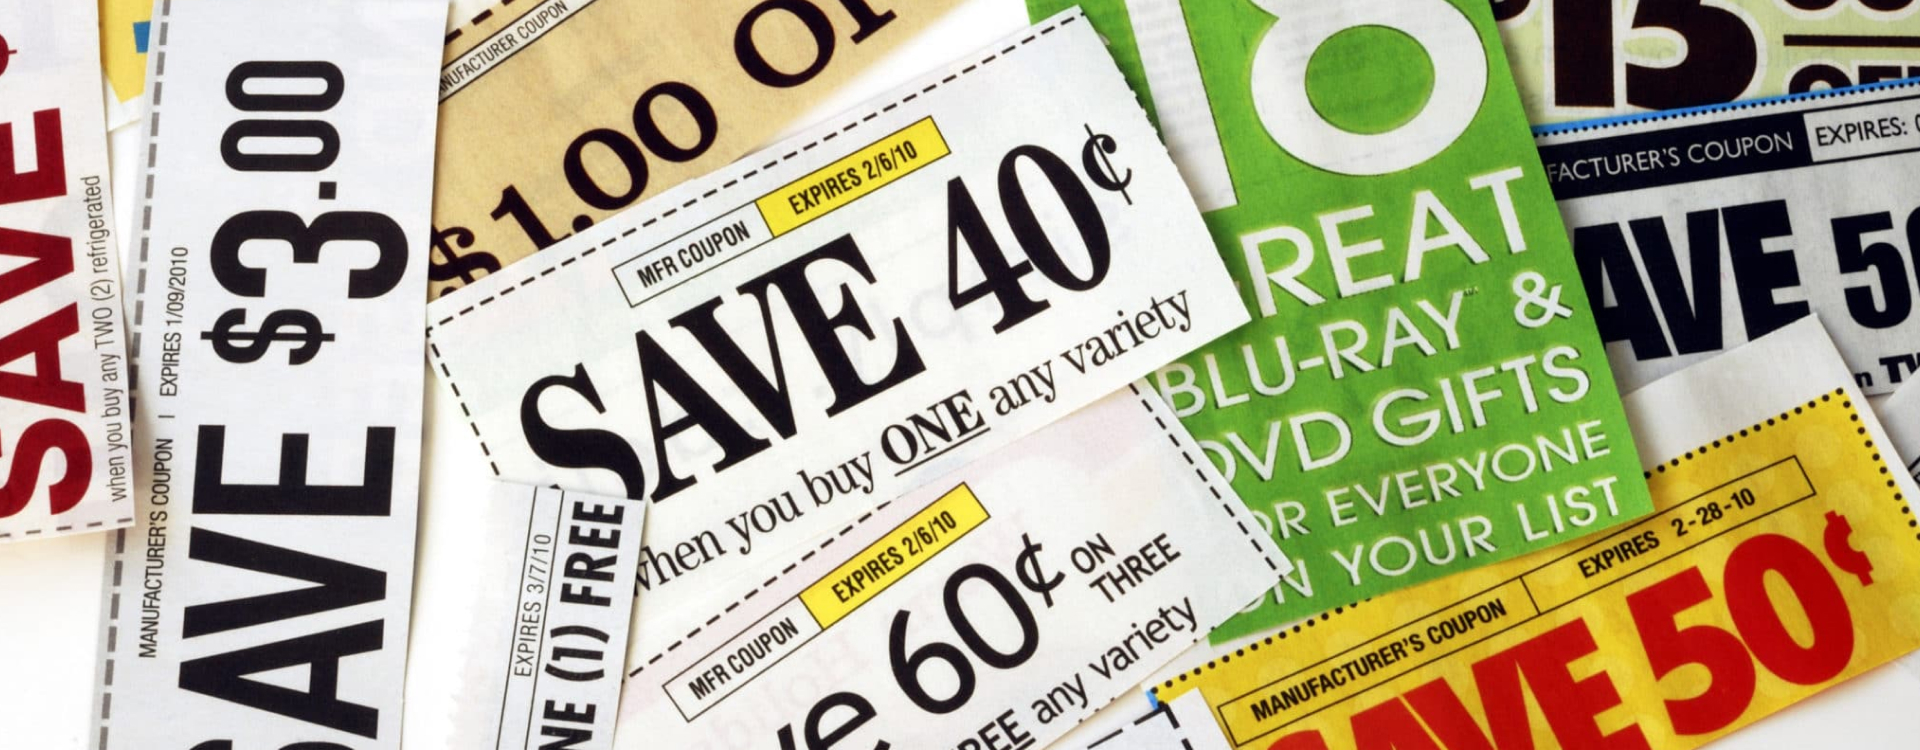 Free Samples Pro USA How to Use Sunday Newspaper Coupons